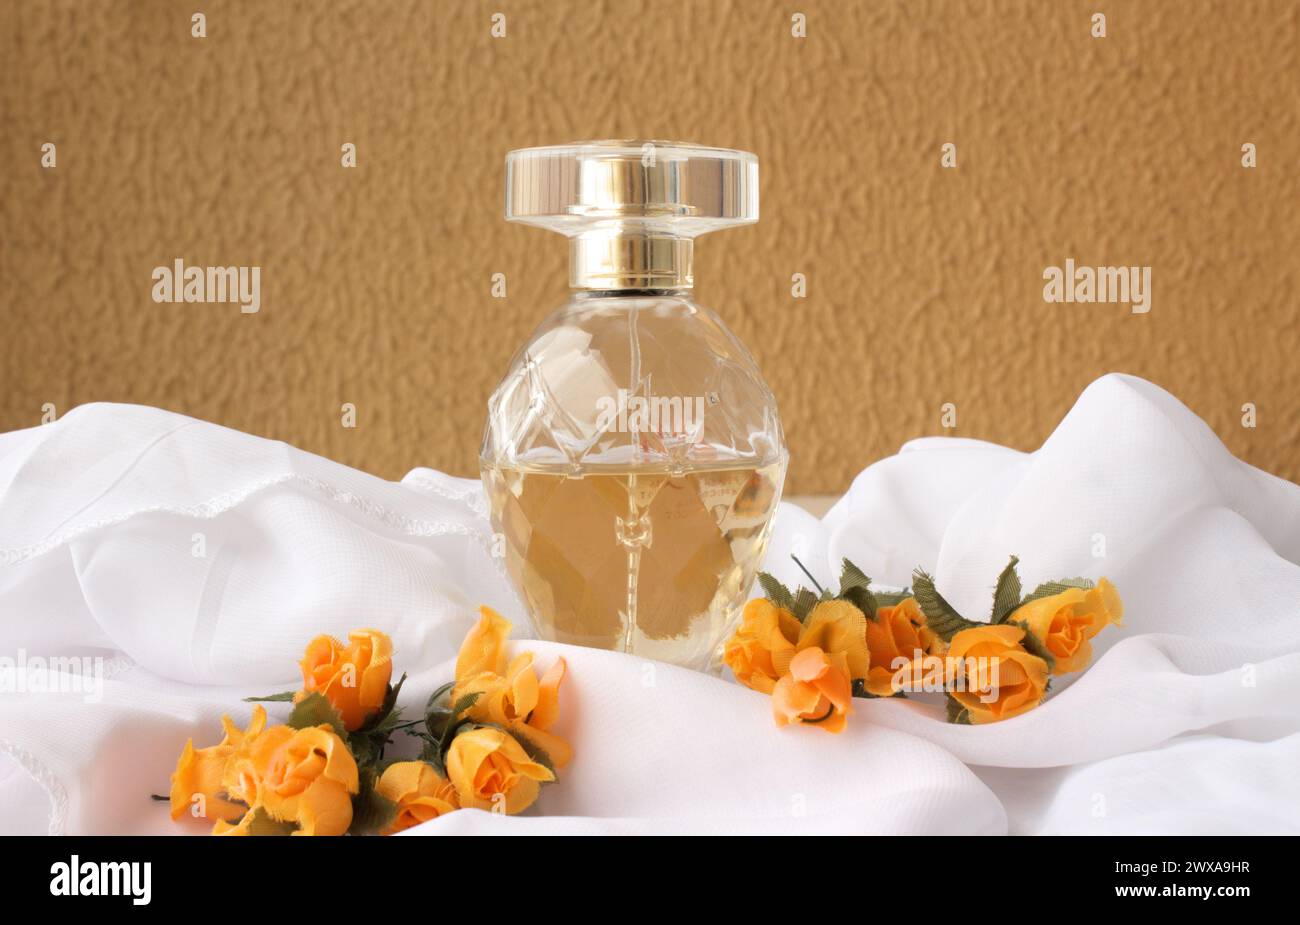 Female fragrance perfume on white fabric with orange color flowers in front of mustard color wall. Eau de Parfum product. Stock Photo